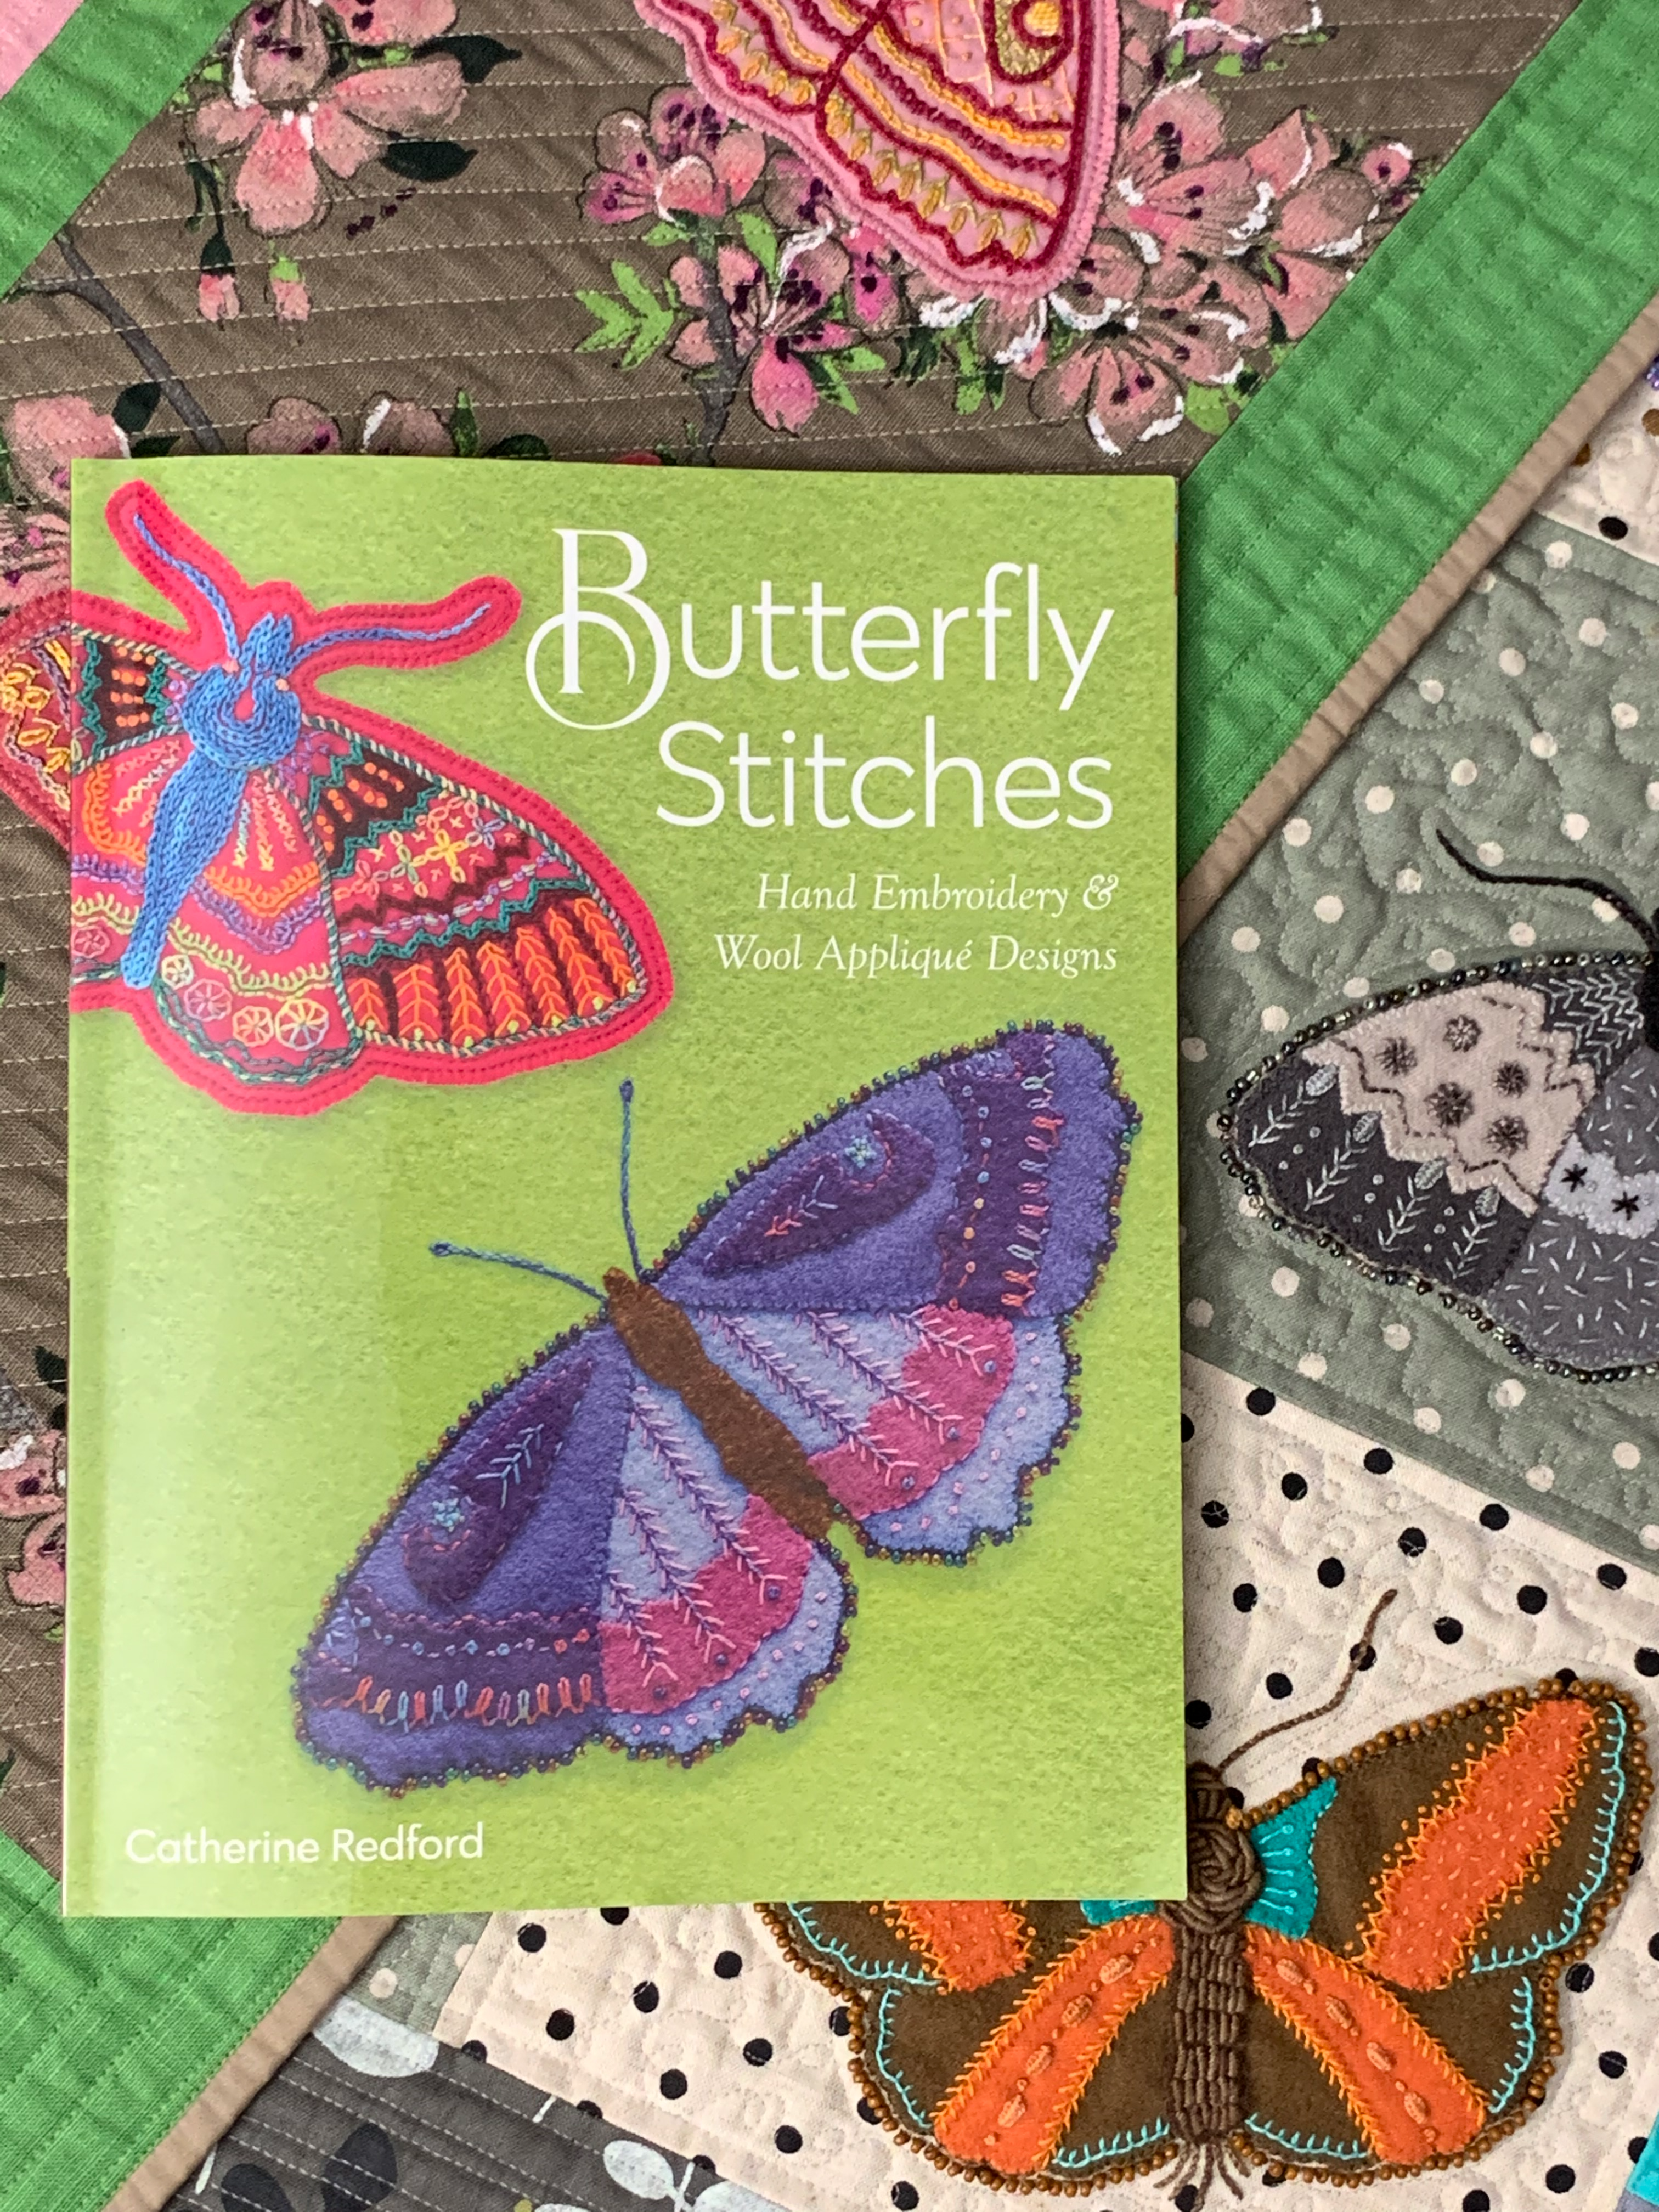 CR - Catherine Redford's Butterfly Stitches